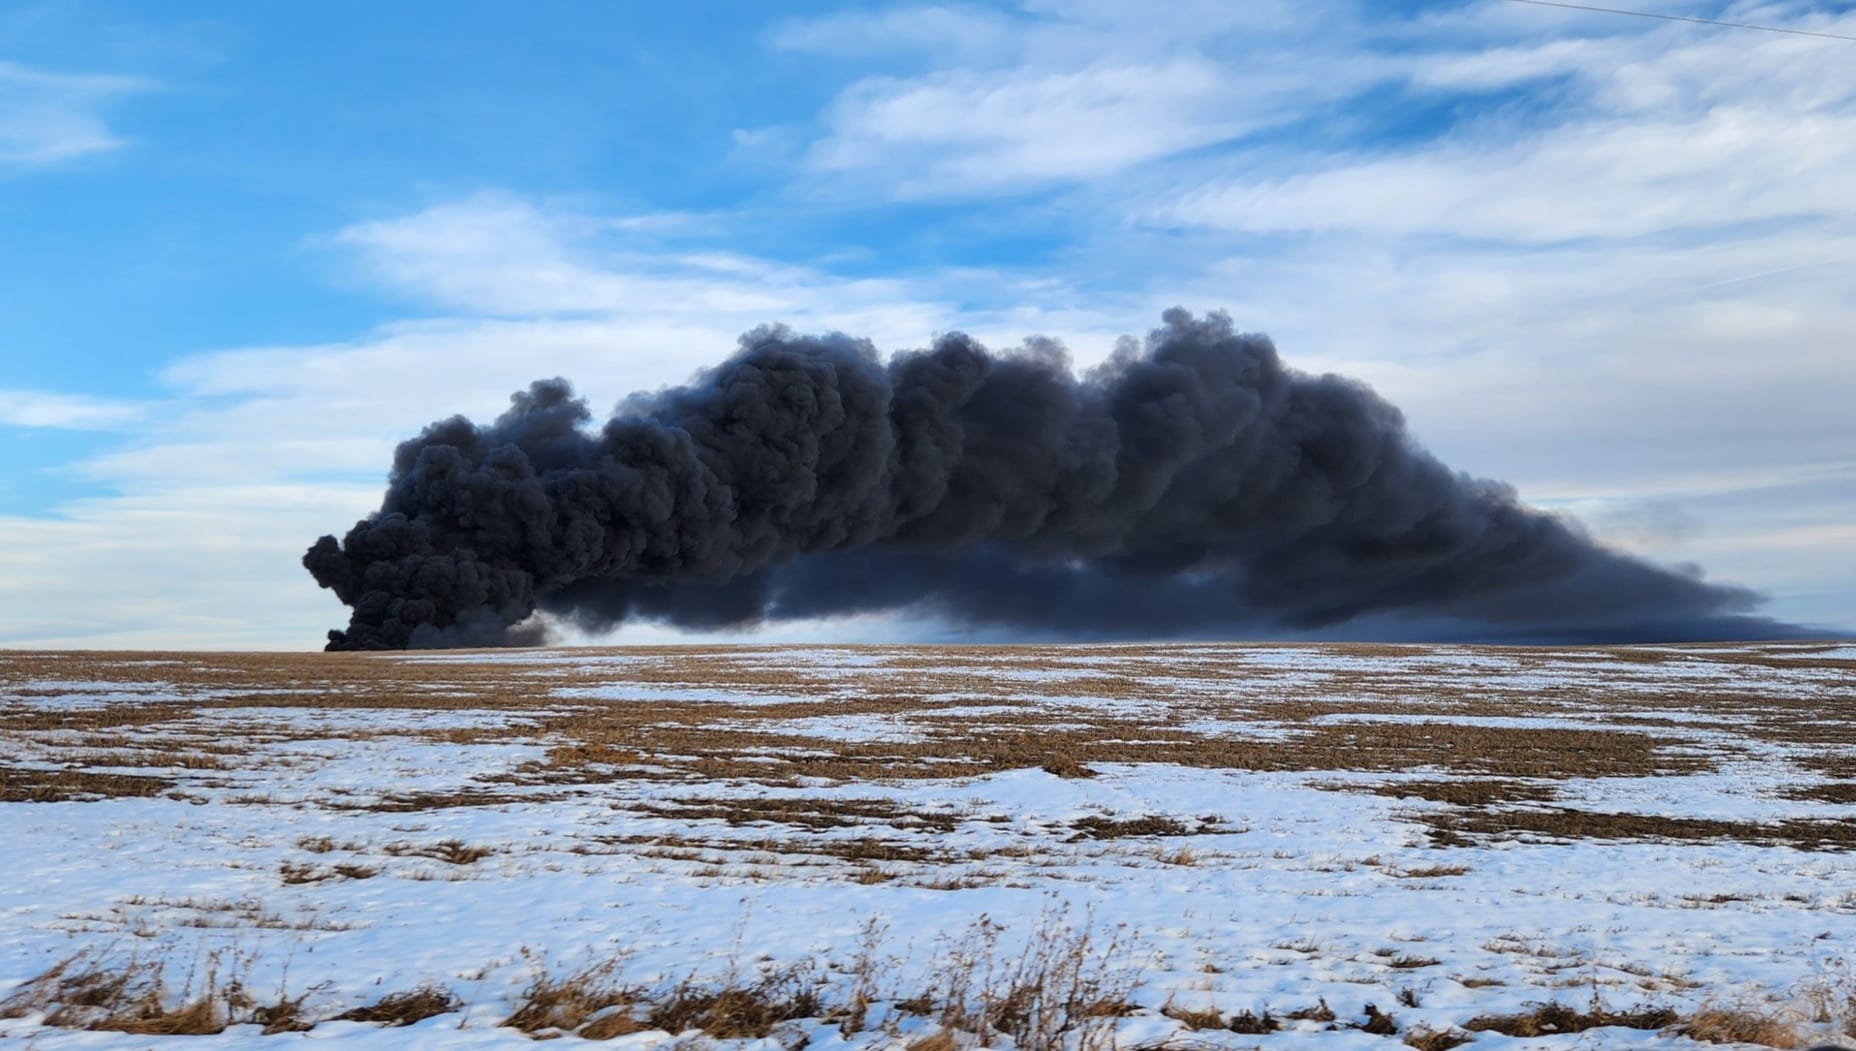 Toxic smoke from fire at oil lease site triggers emergency alert in eastern Alberta